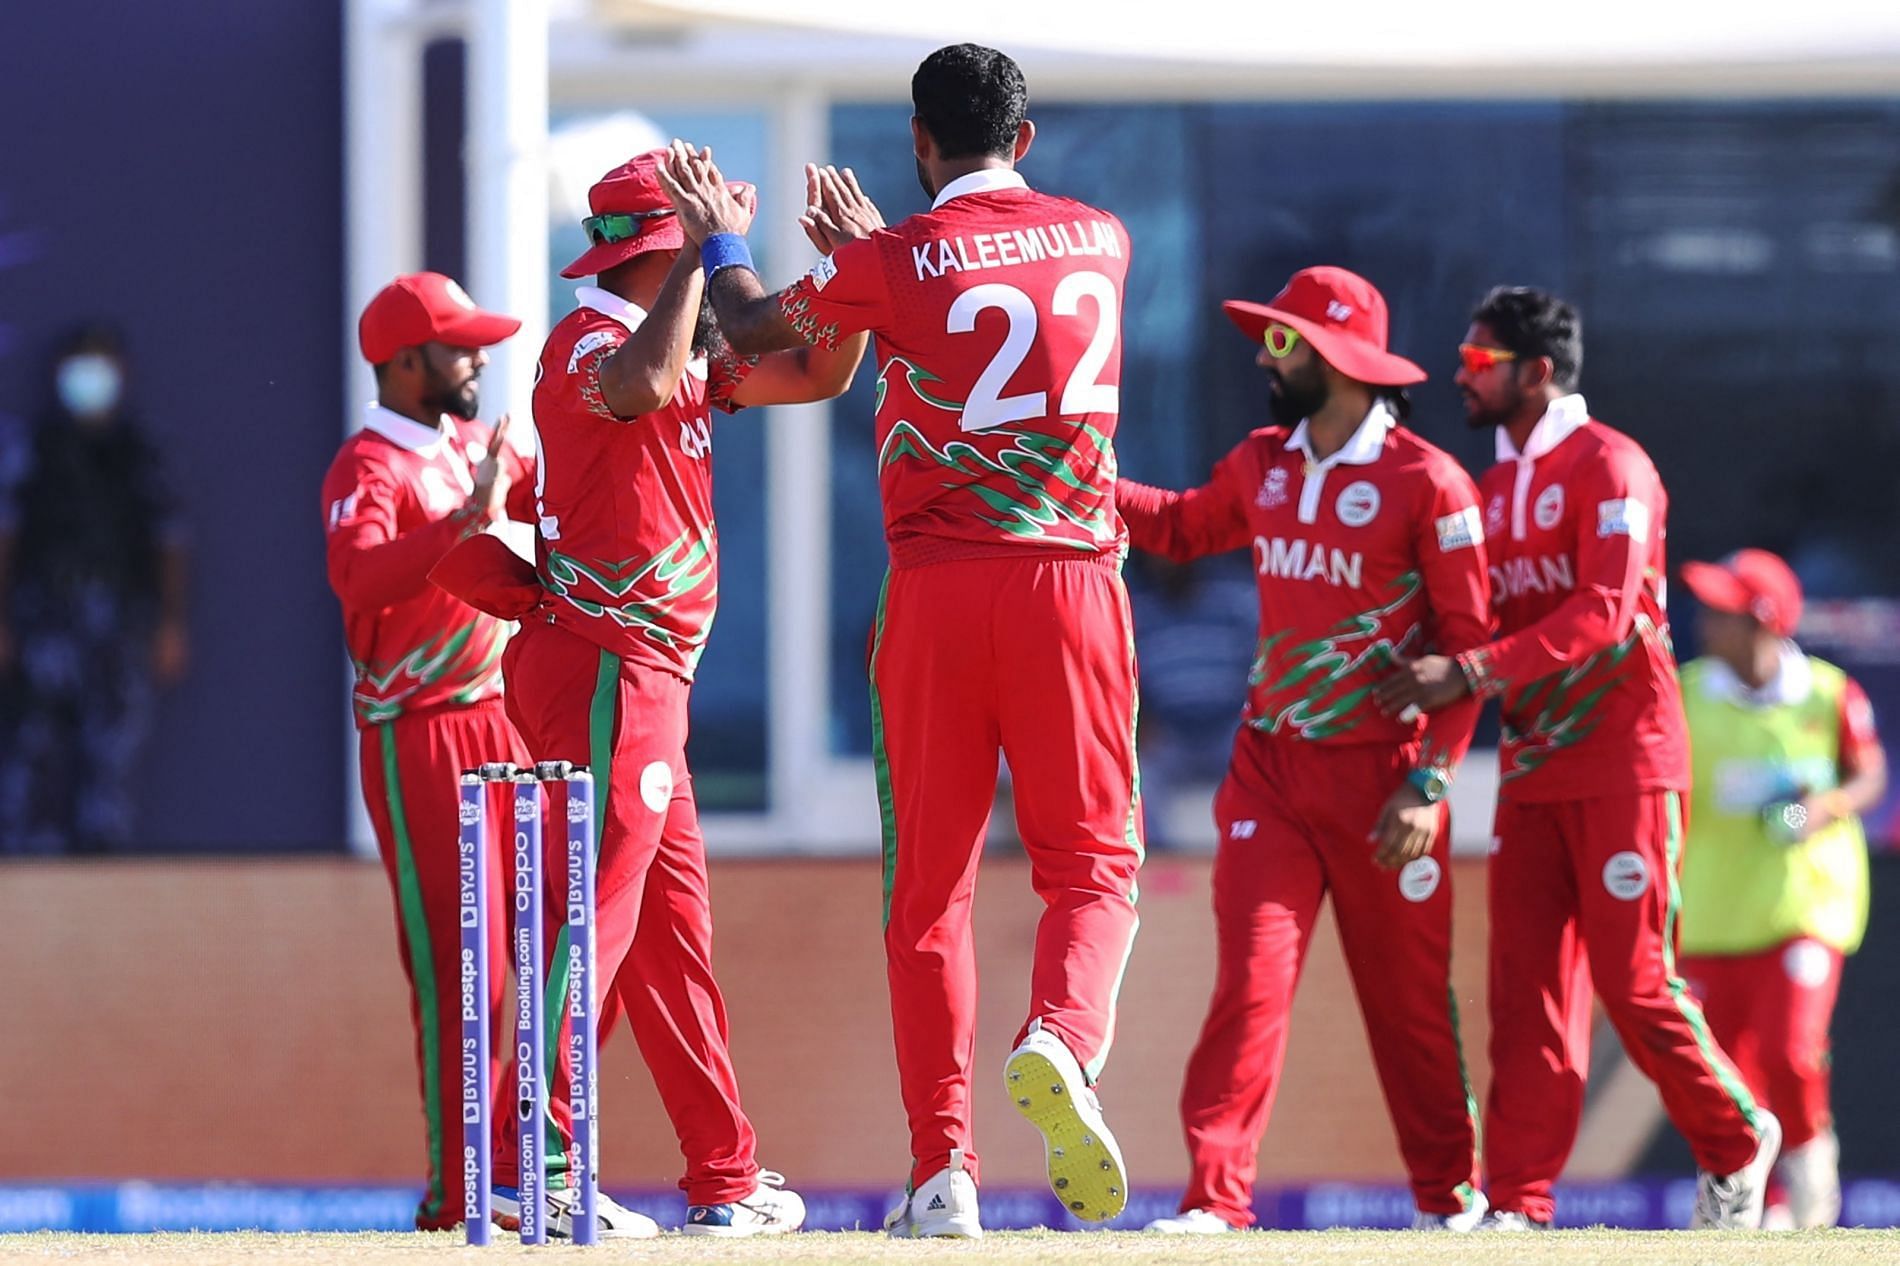 Oman players celebrate a wicket. Pic: T20WorldCup/ Twitter